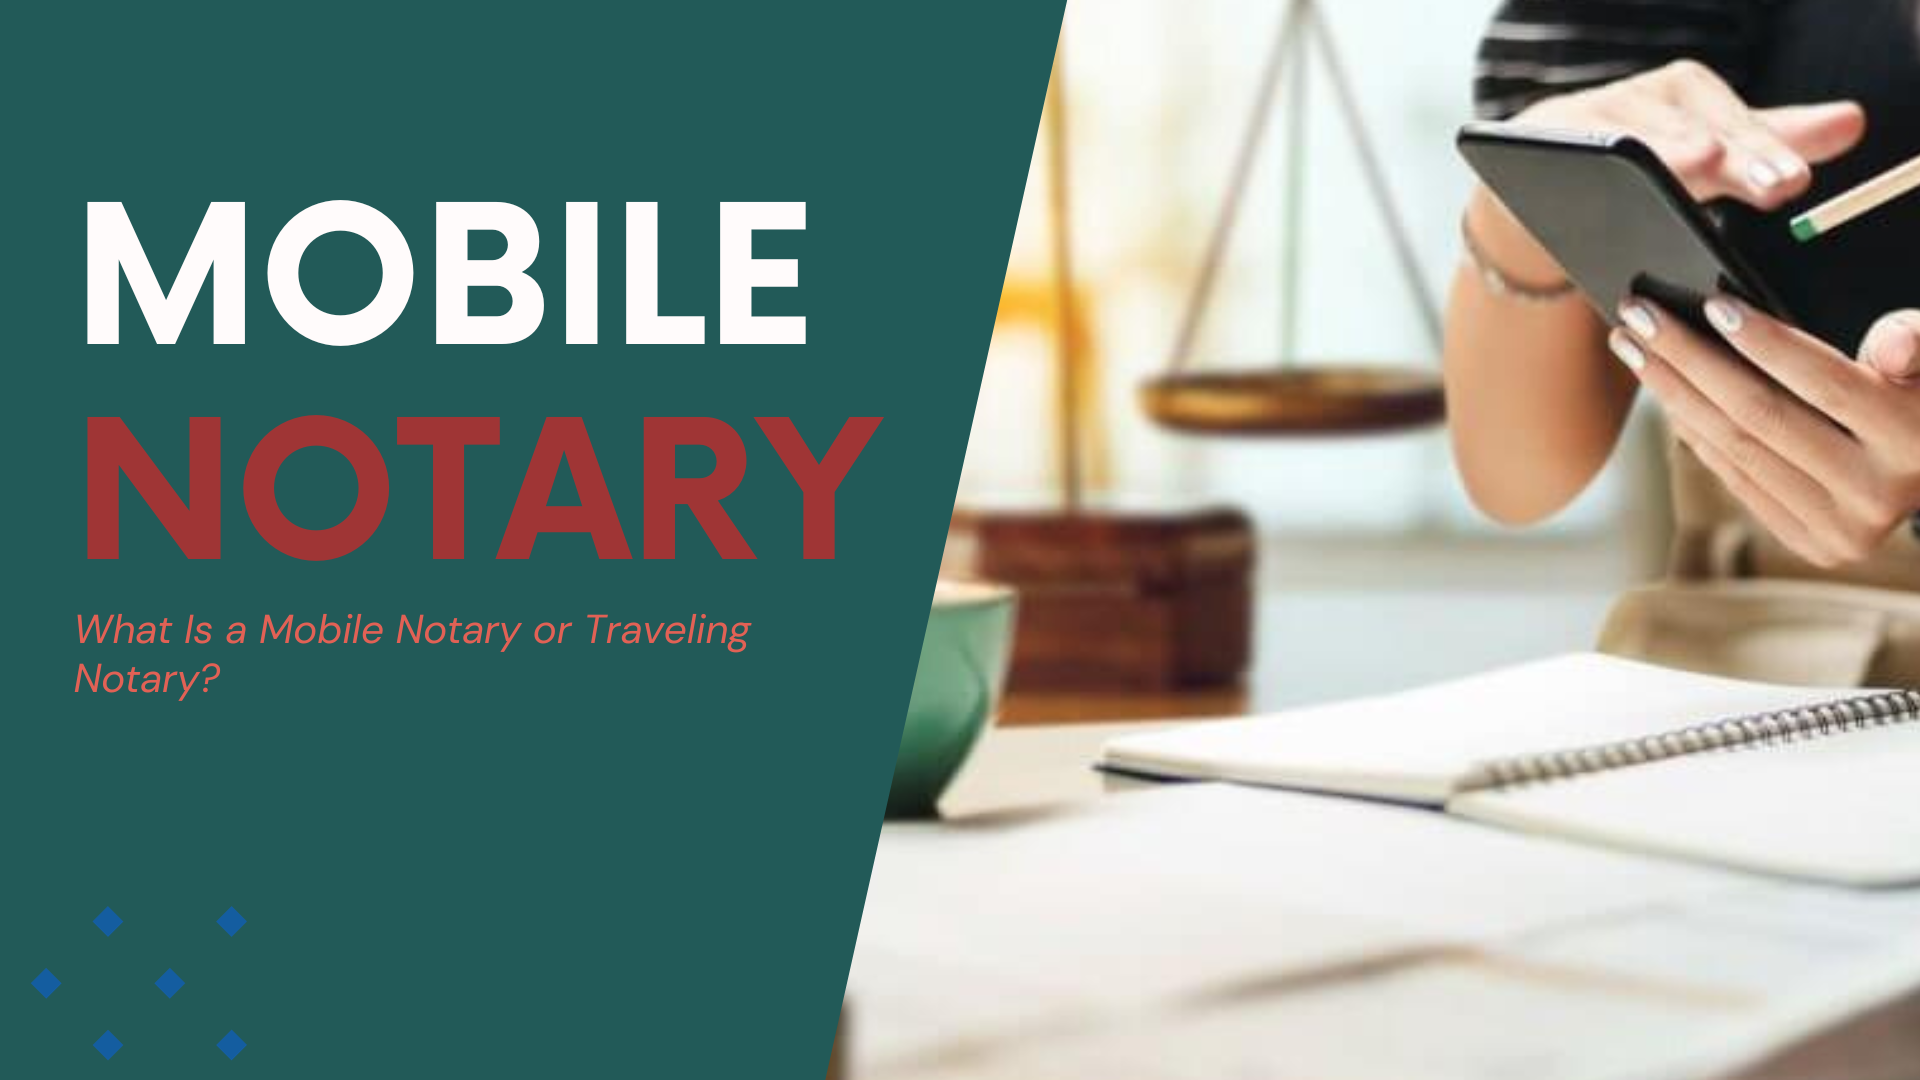 What Is a Mobile Notary or Traveling Notary